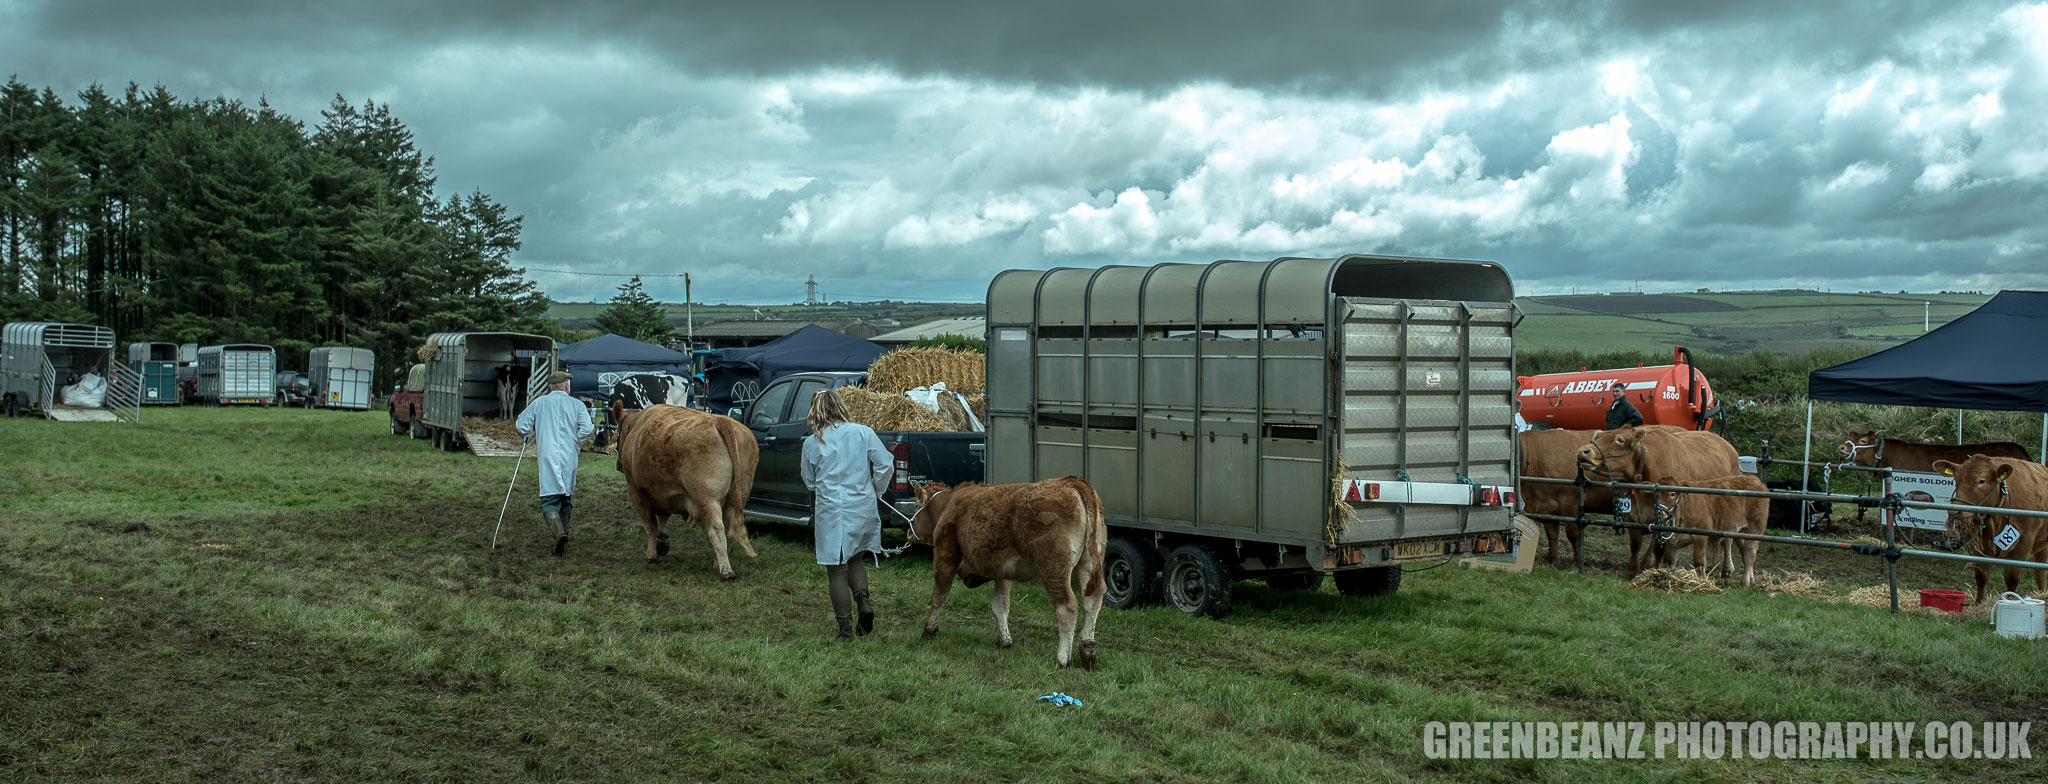 Cattle being led away at Camelford Farm Show 2017